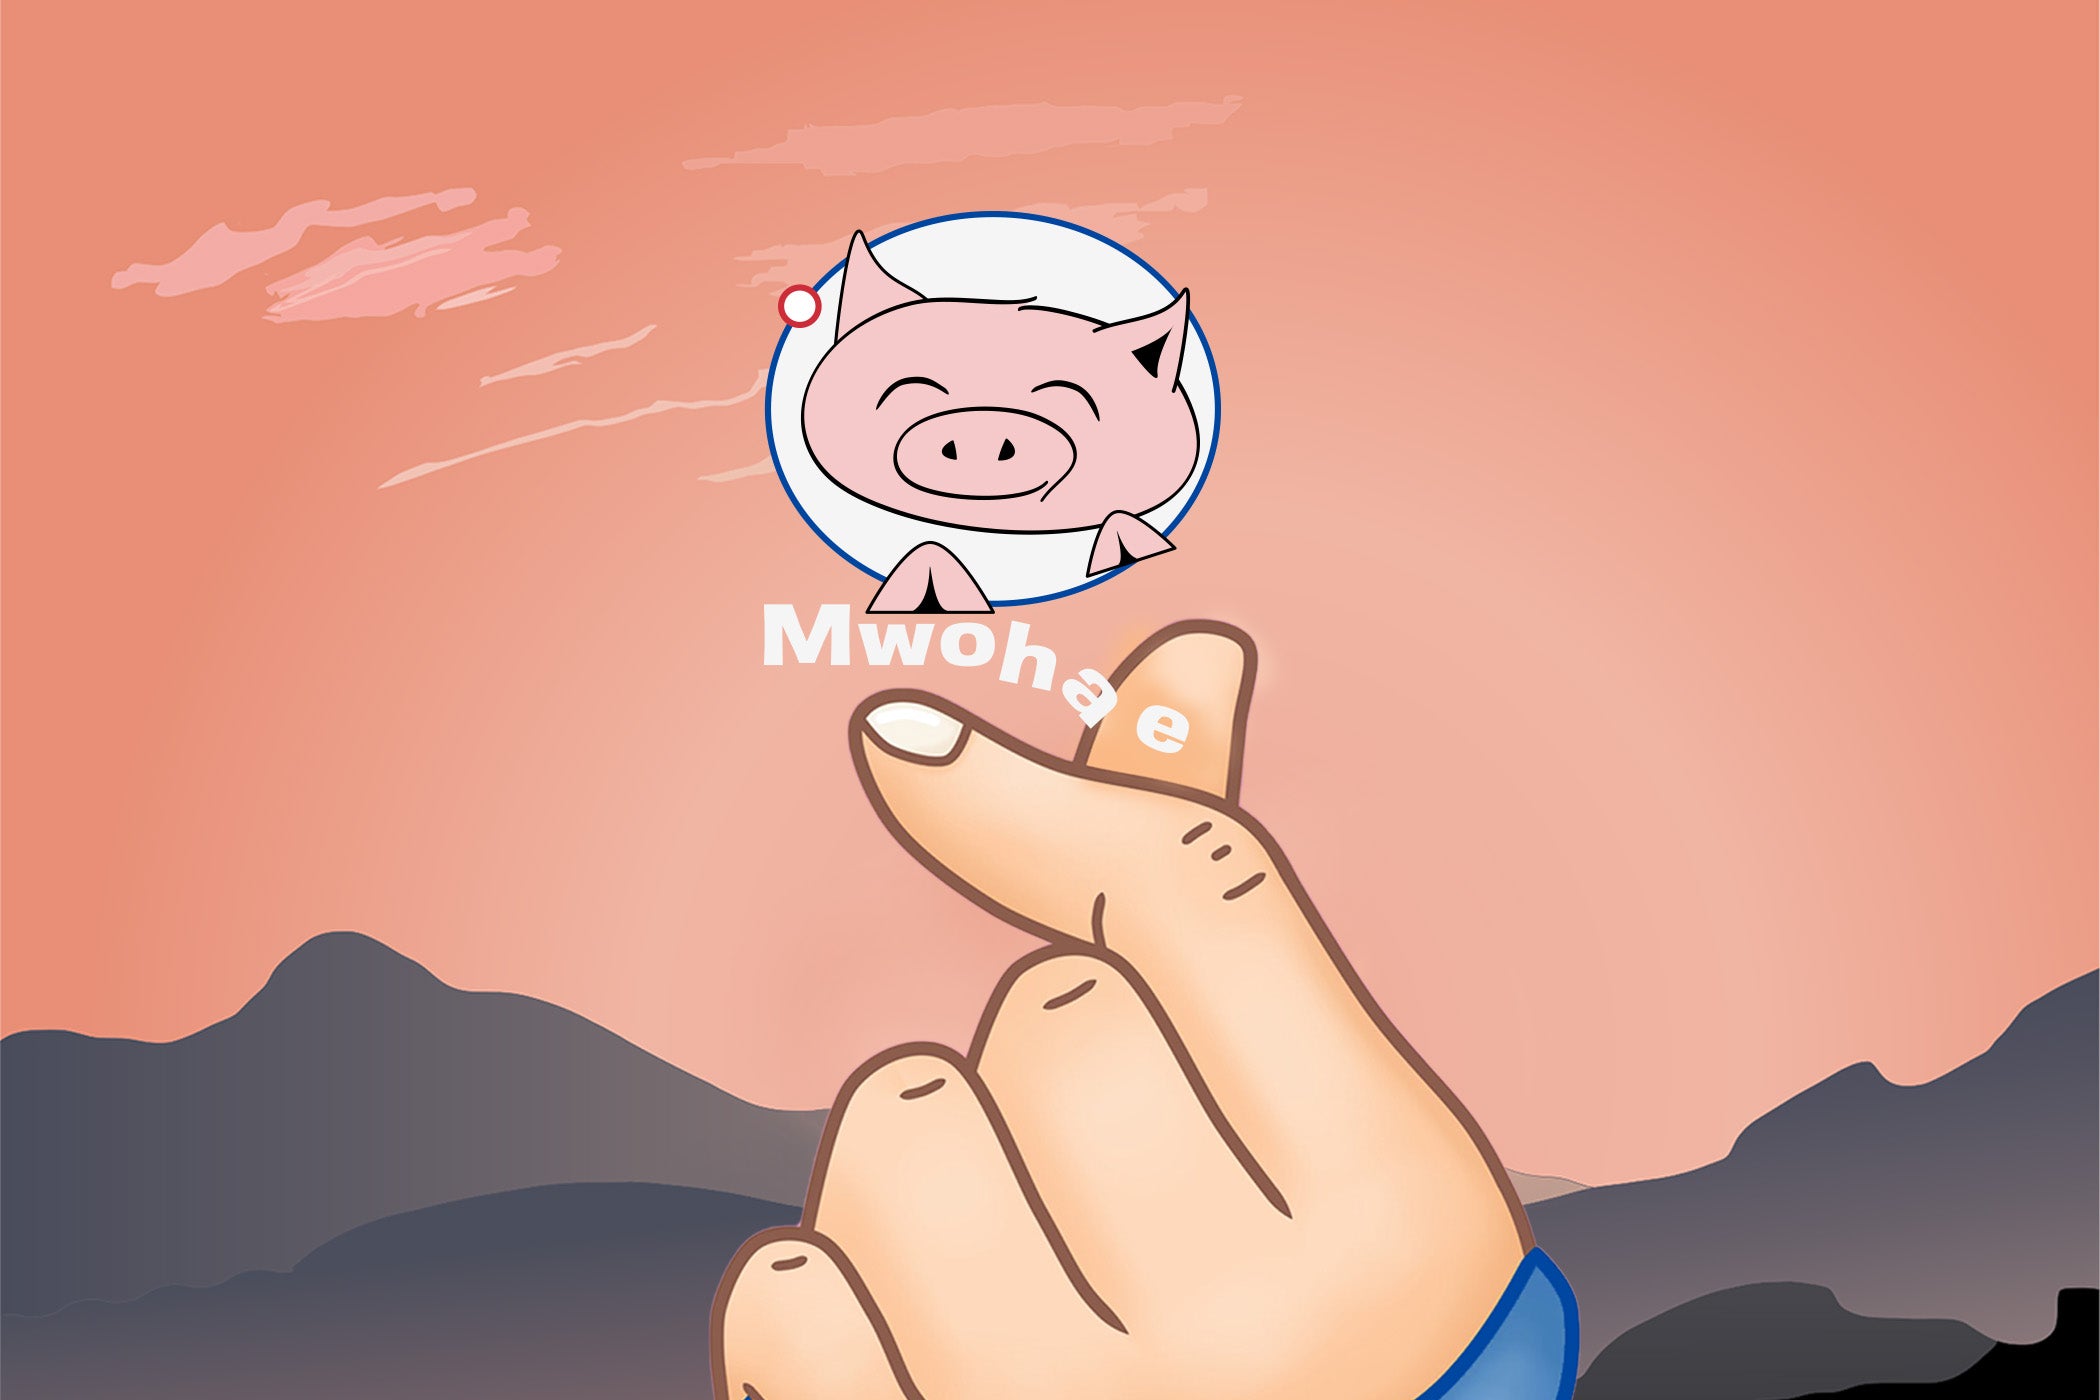 Cover image of Mwohae: a Korean finger heart with a small Mwohae logo above it